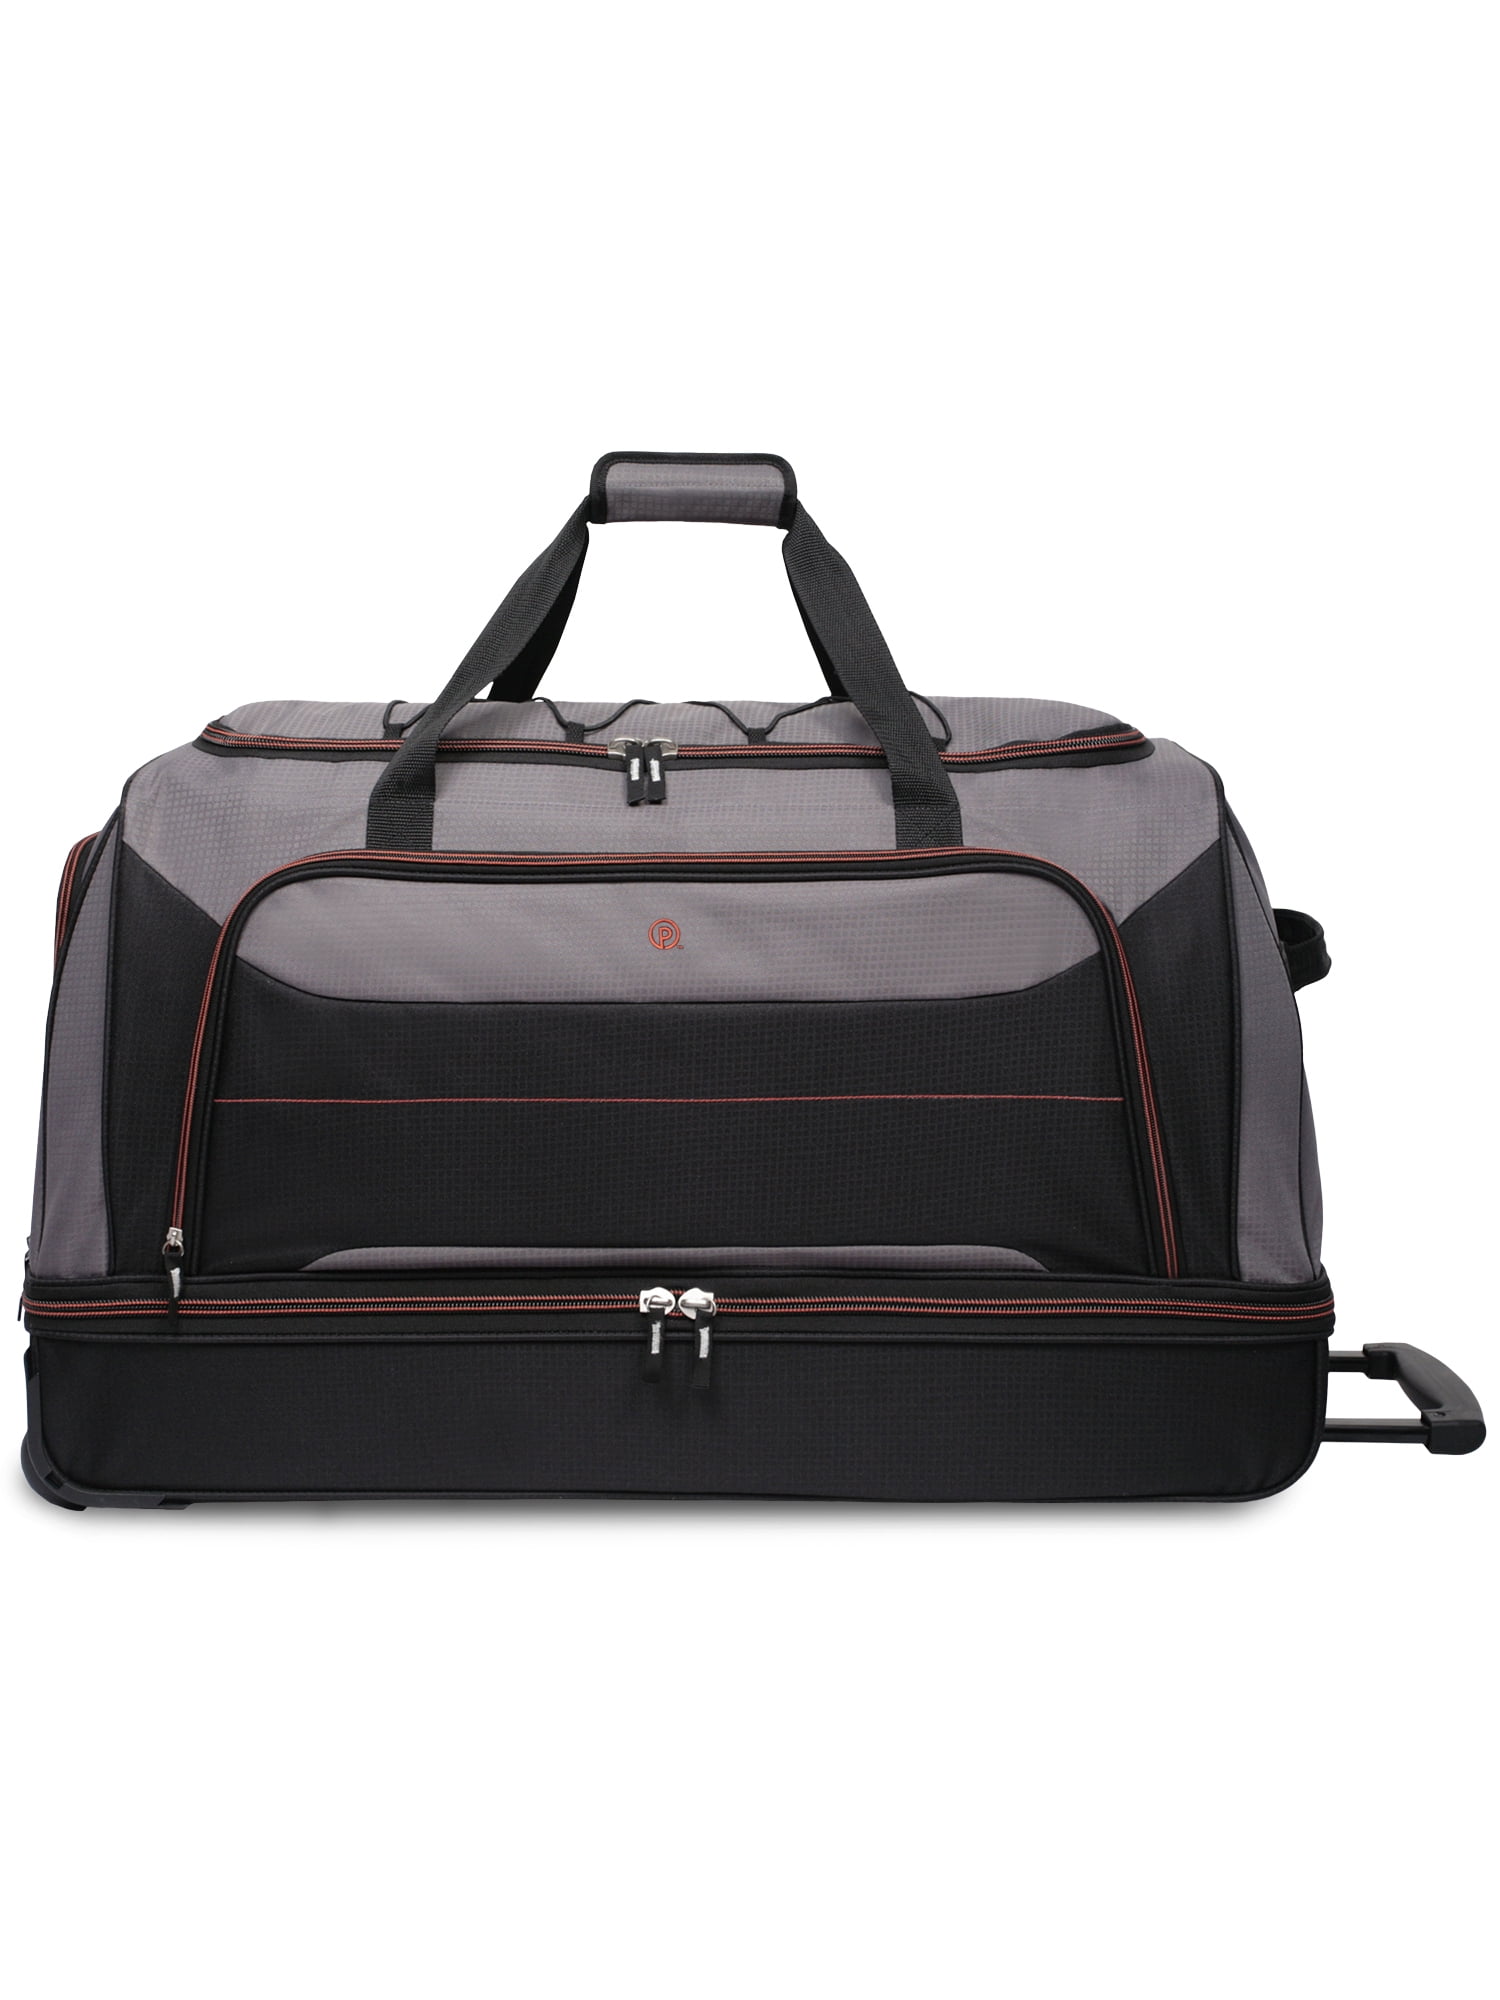 Protege 30in Rolling Duffel Black And Grey With Telescopic Handle